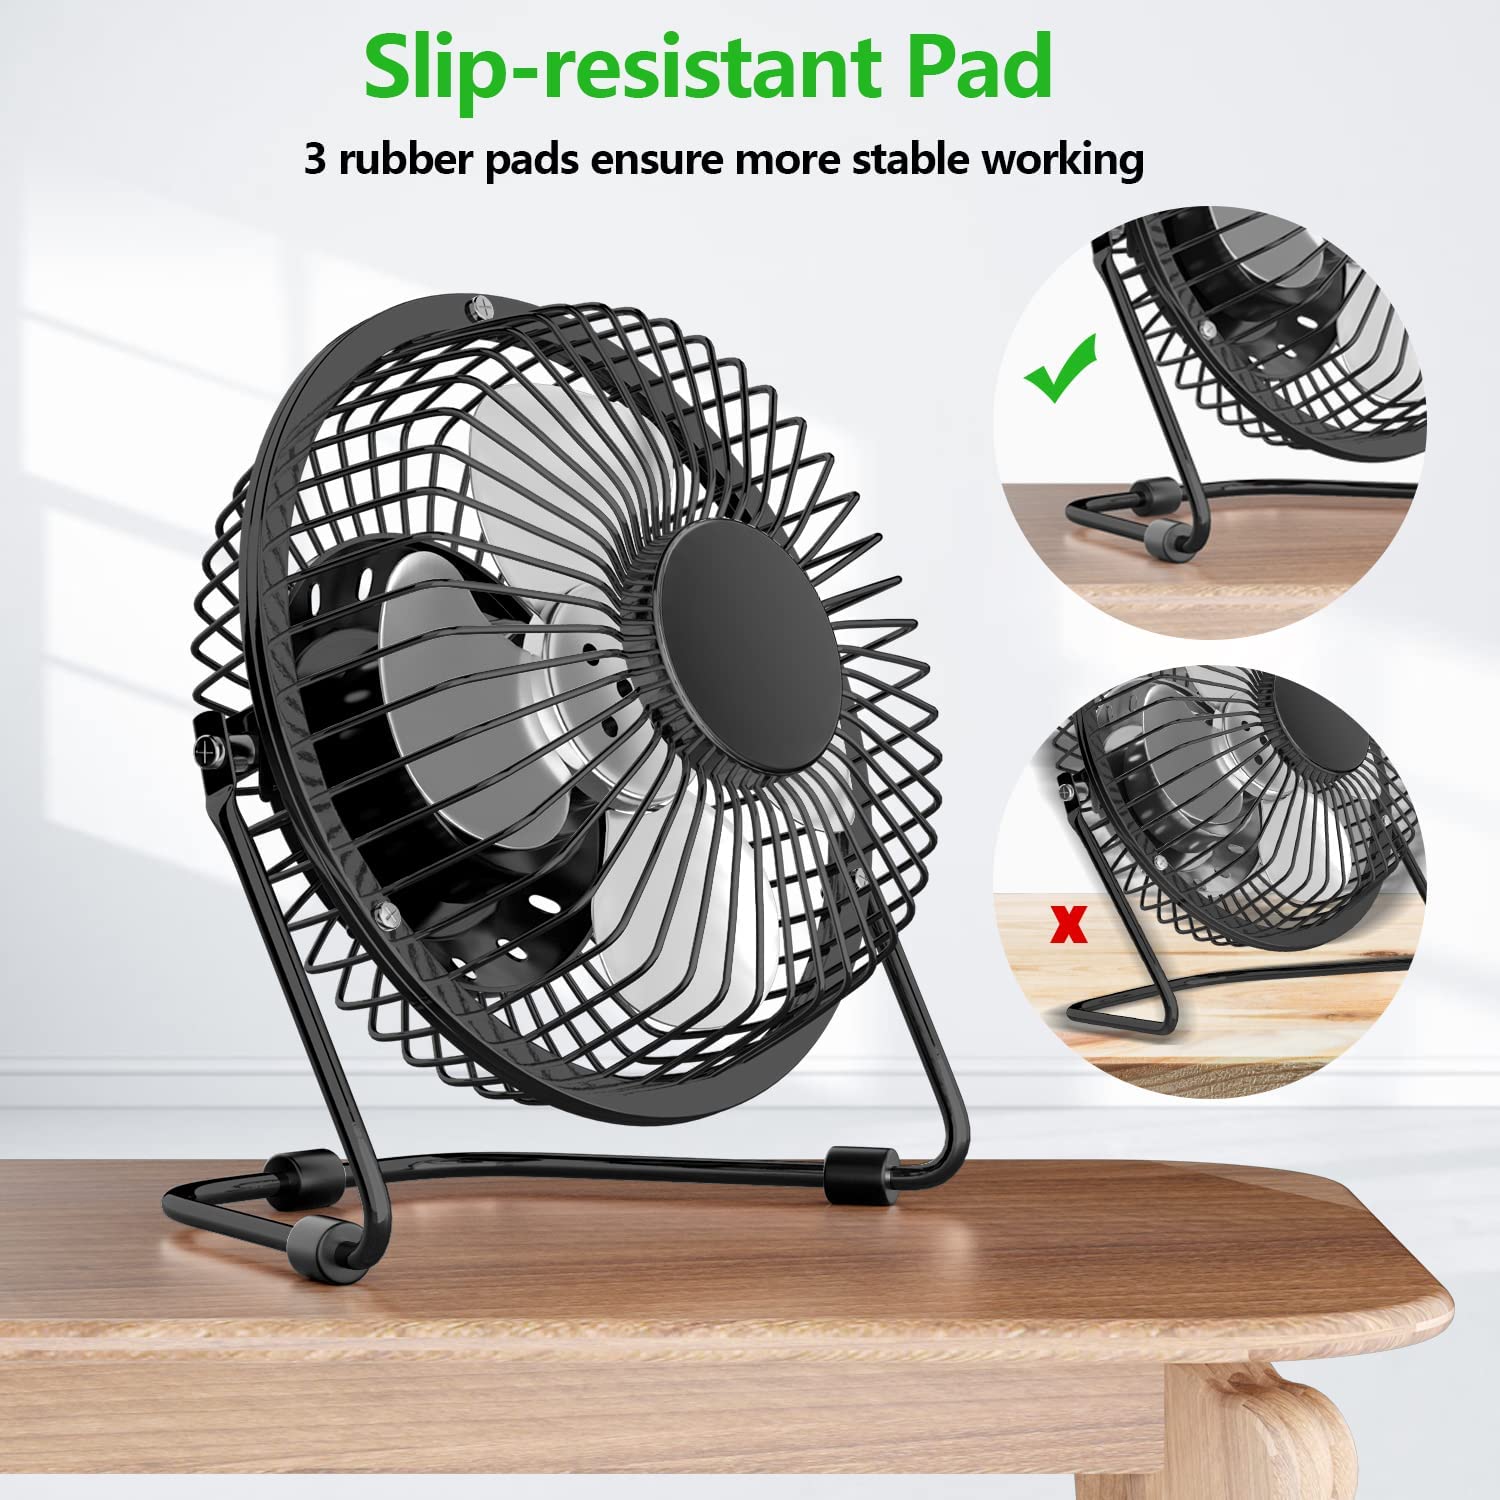 Smart-Home-Appliances-USB-Desk-Fan-With-LED-Time-Display-4-Inch-Portable-Metal-Frame-Cooling-Fan-360-Rotation-Low-Noise-Clock-Fan-for-Home-Office-49